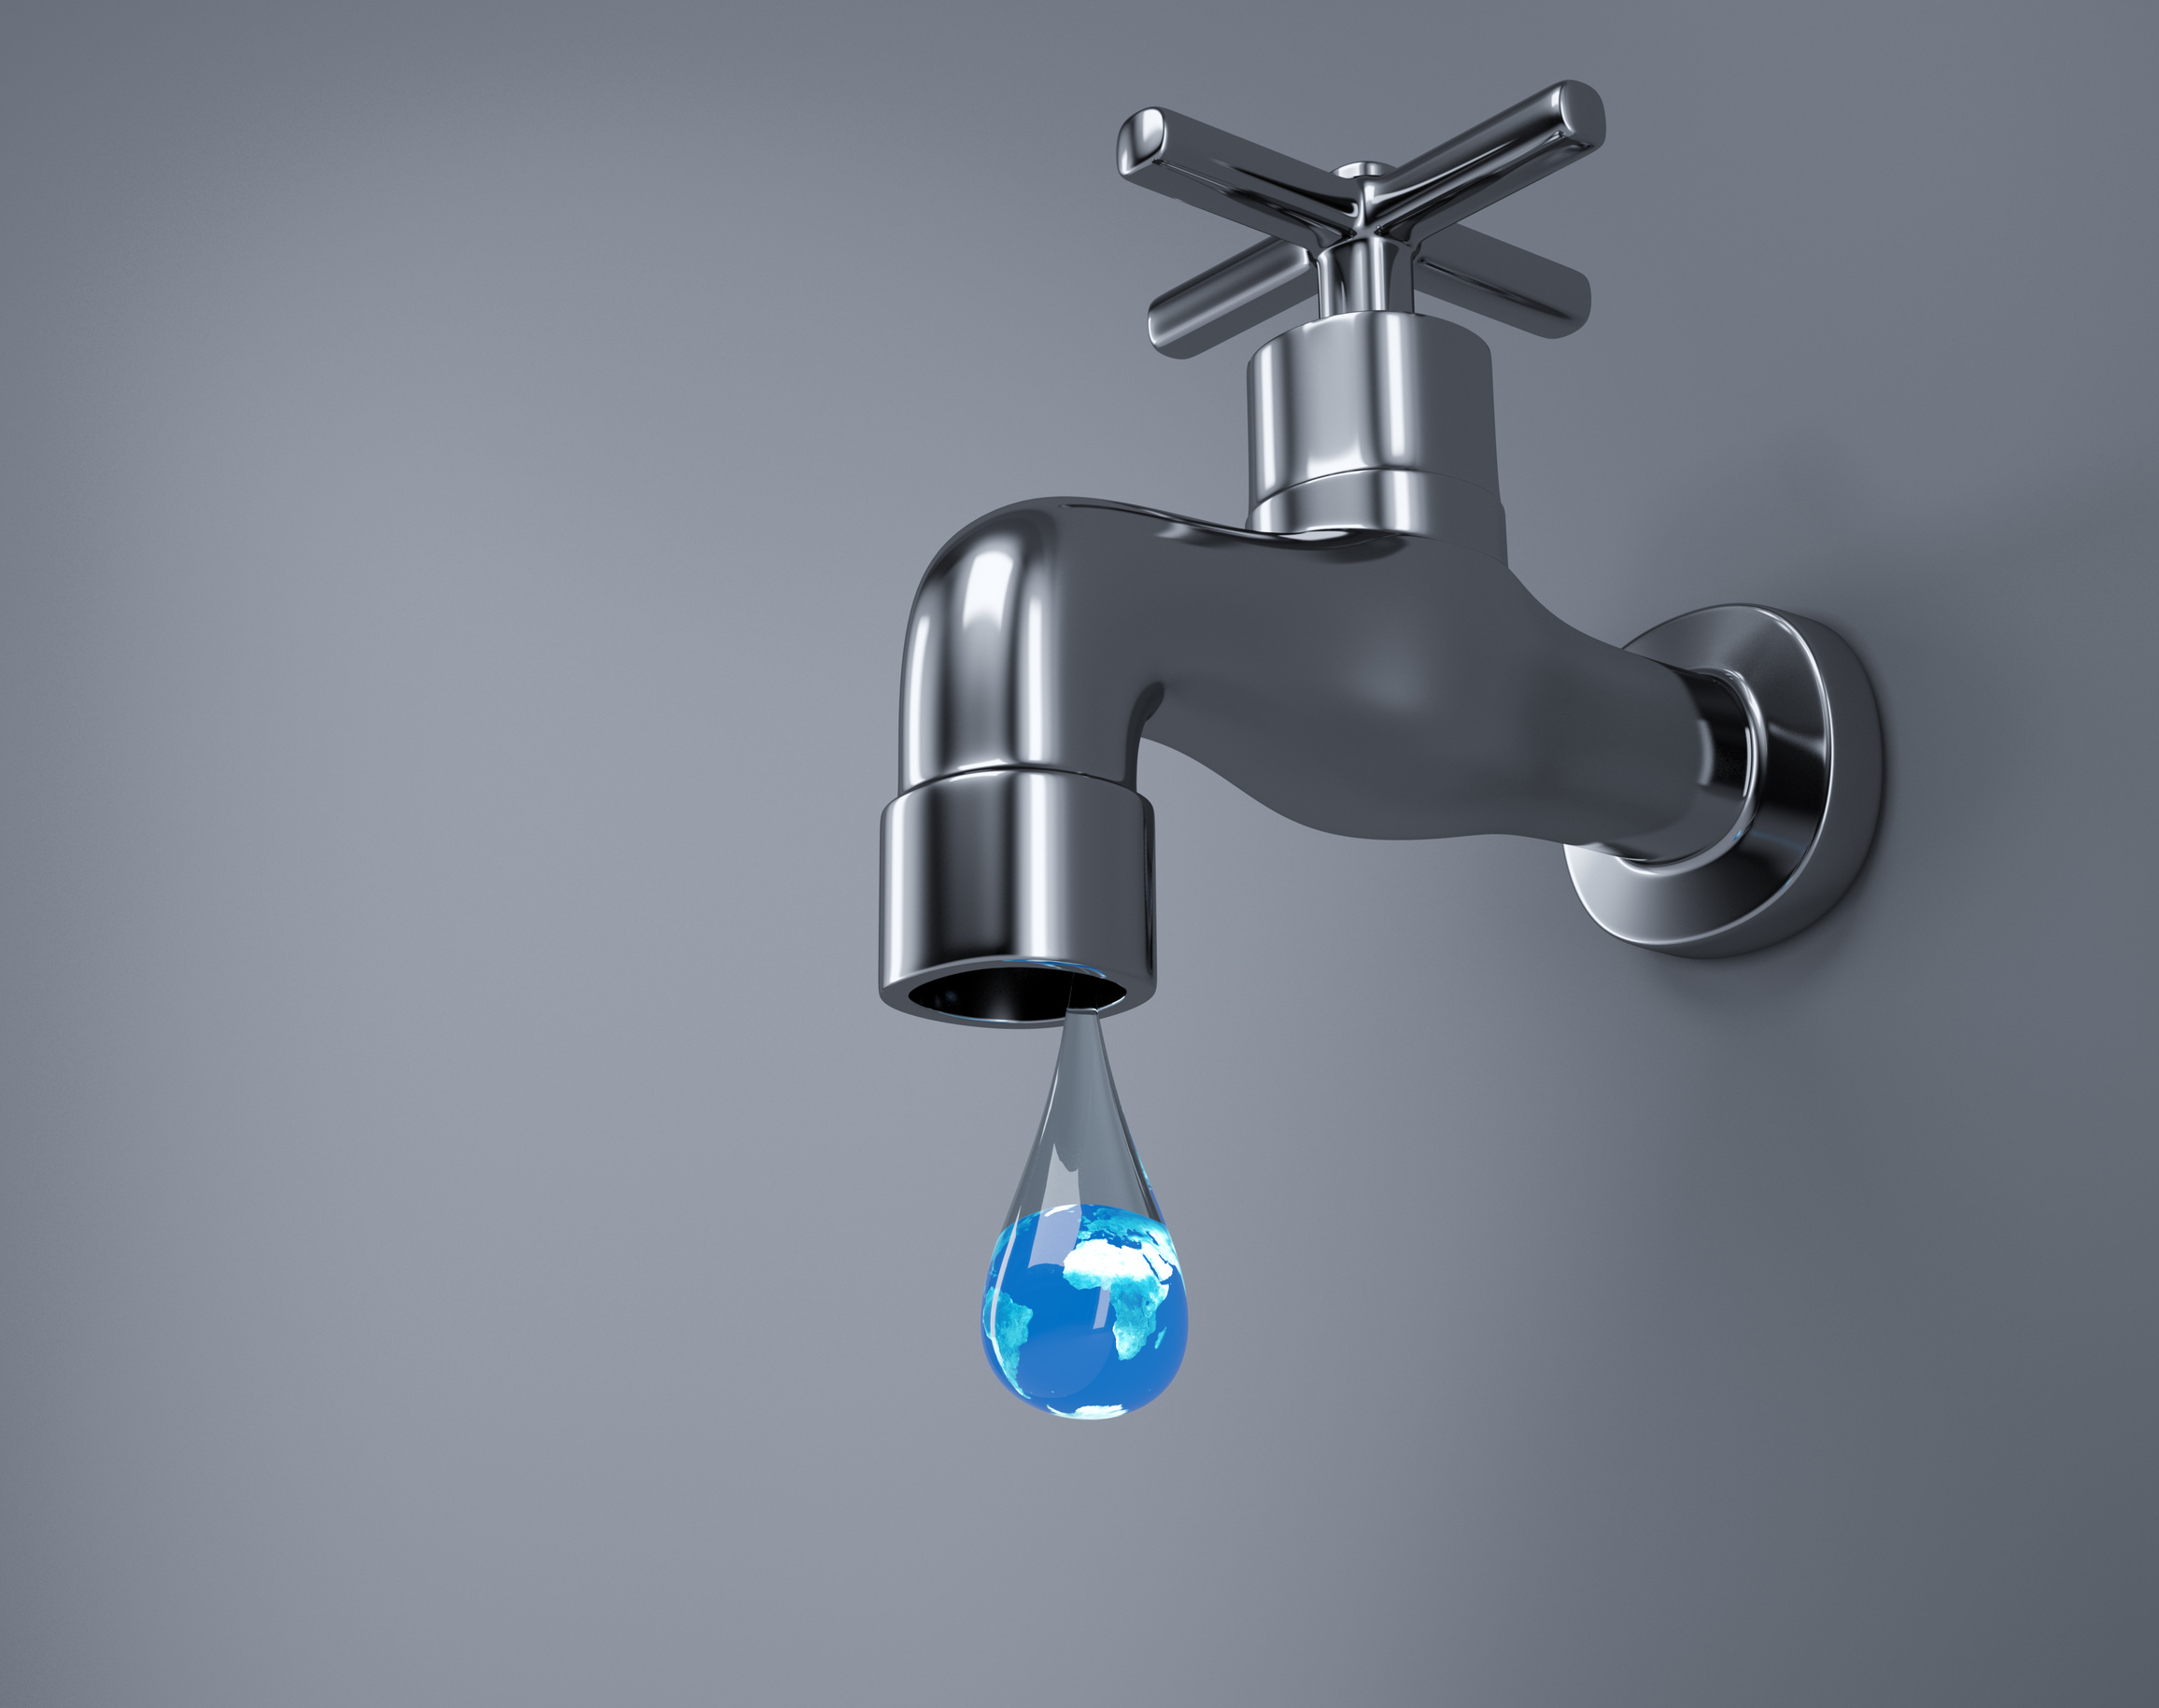 Save water concept with metallic faucet